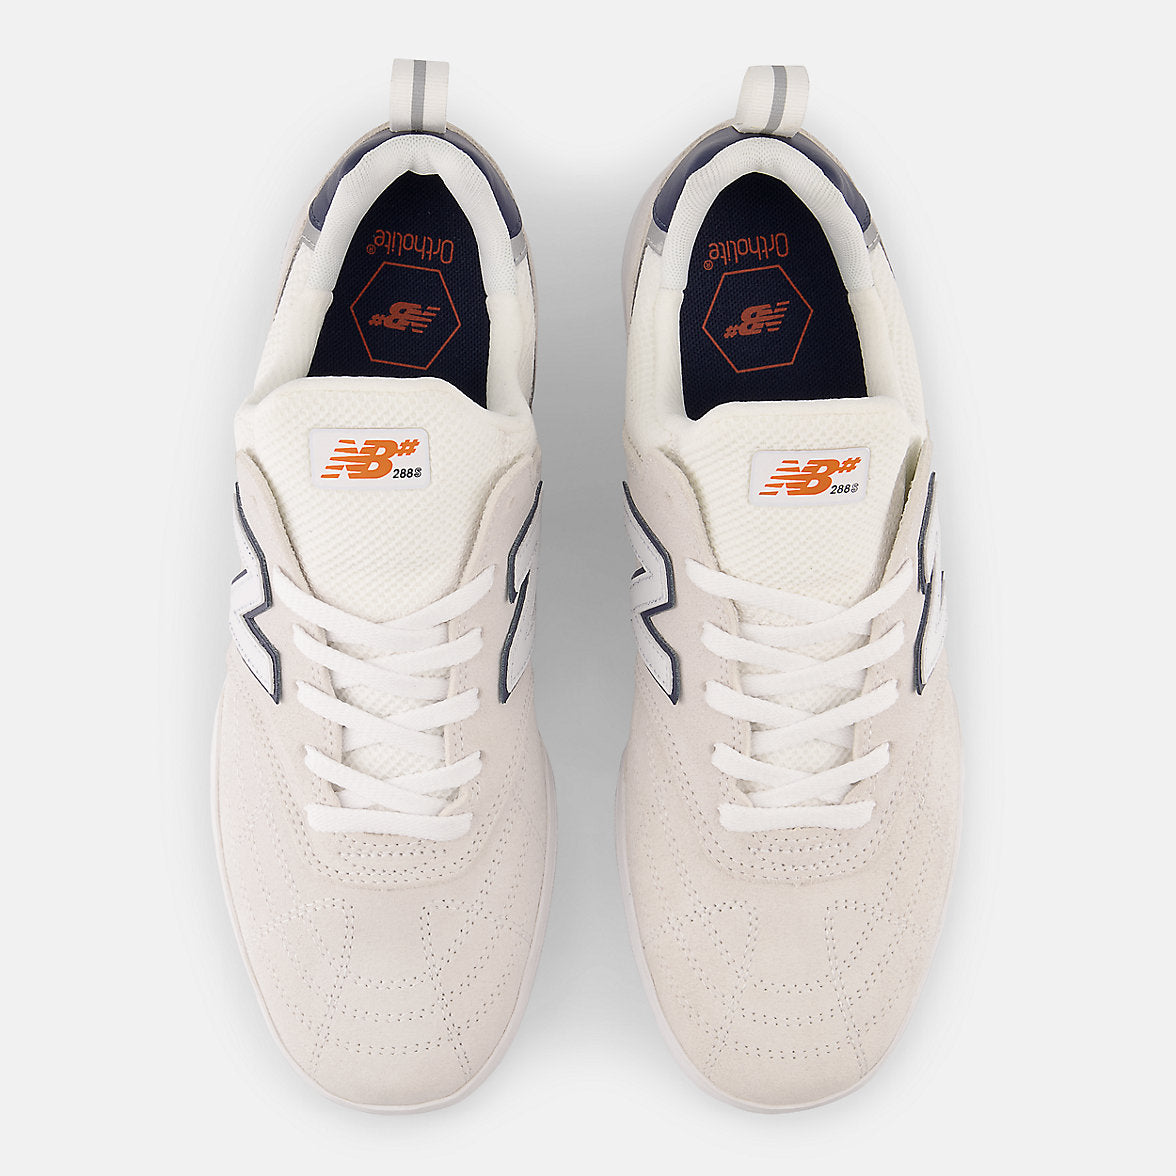 New Balance 288 Suede White